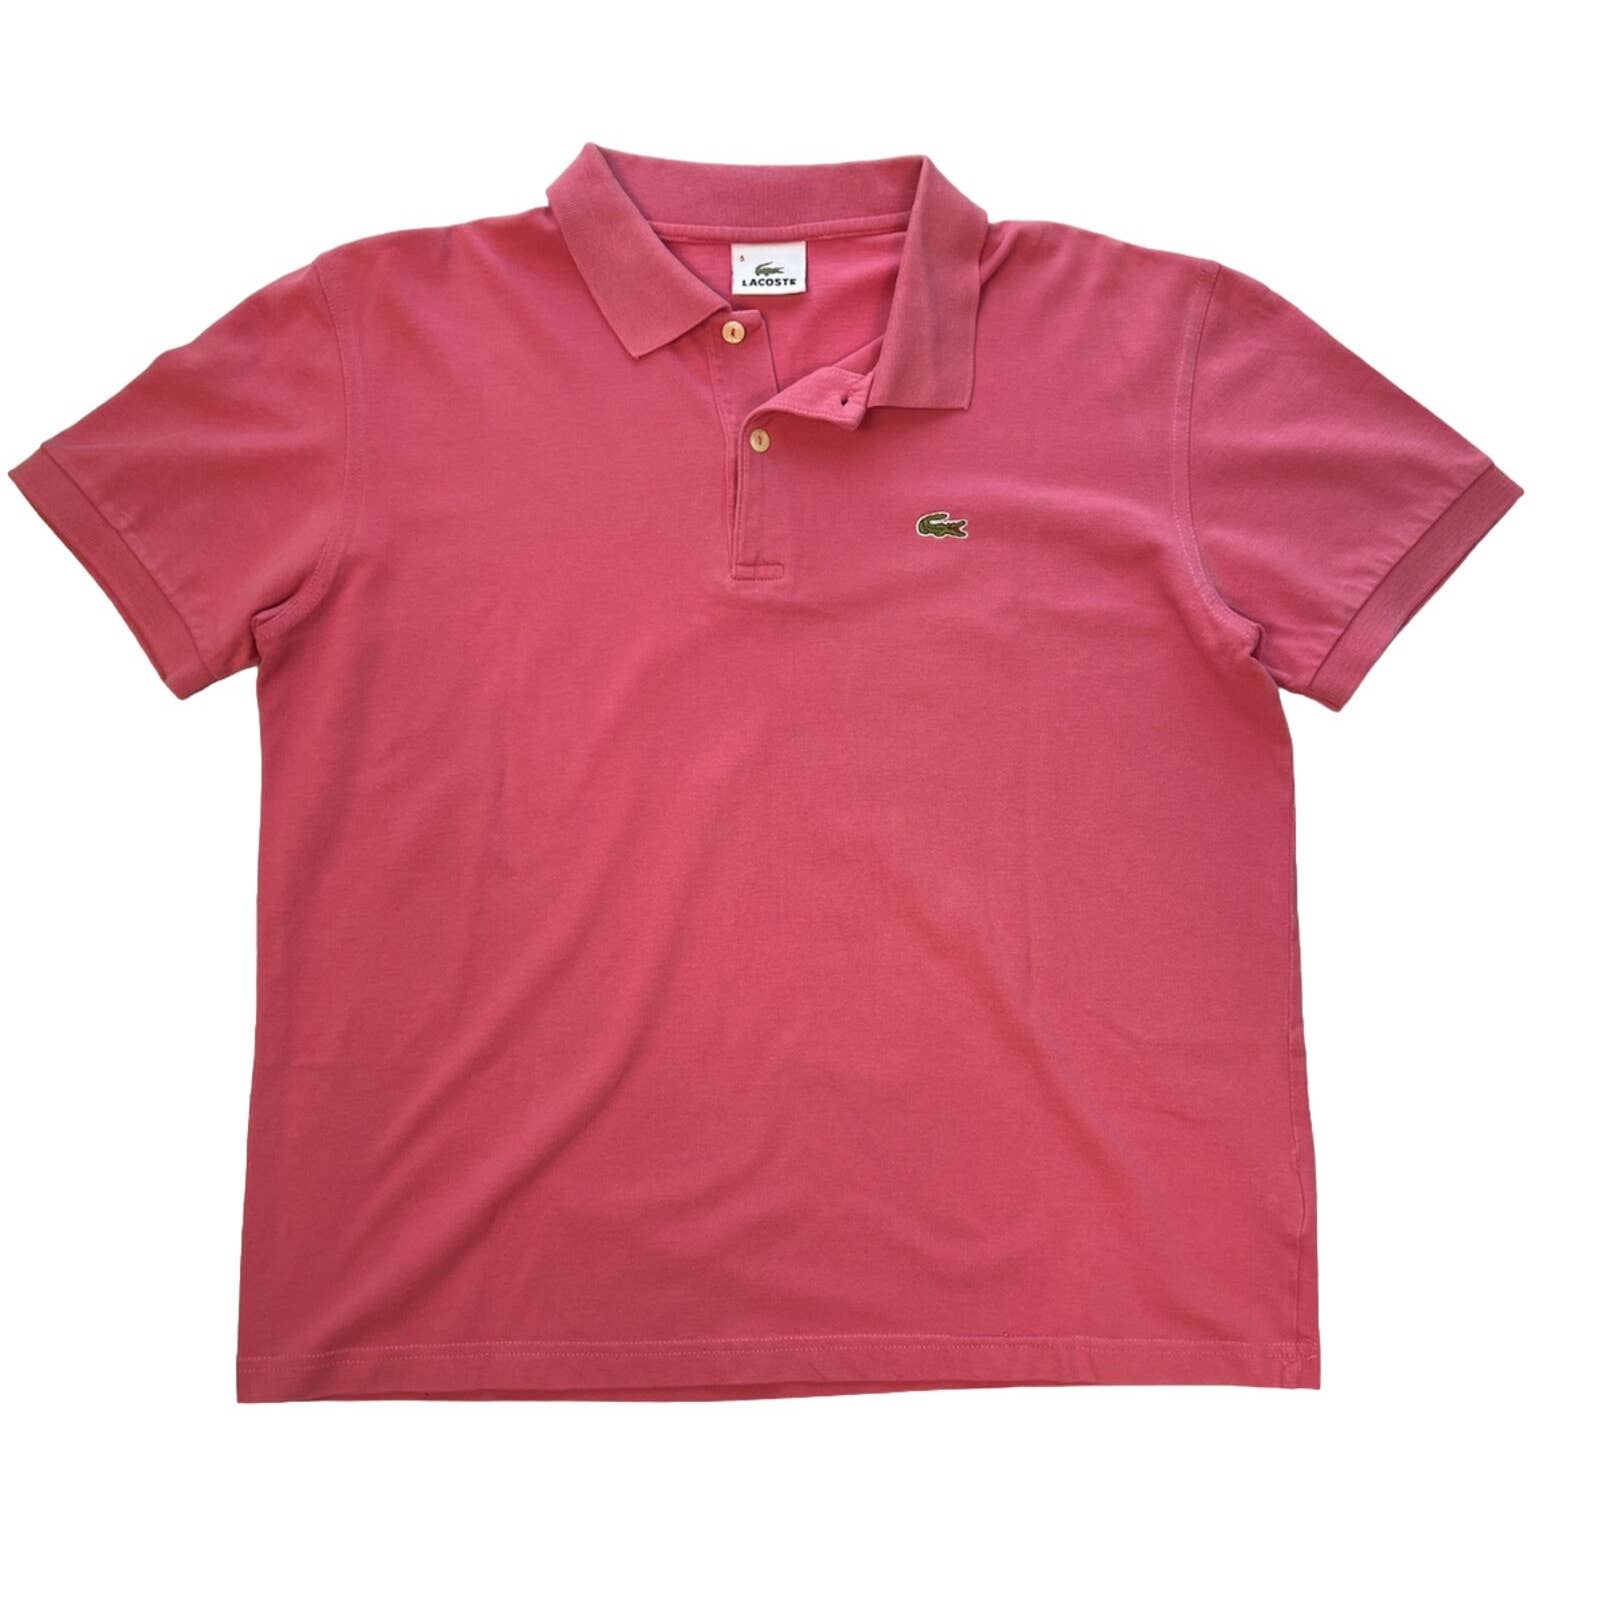 Lacoste Polo Shirt Mens Size 5 Pink Cotton Knit Short Sleeve Casual Comfort Med